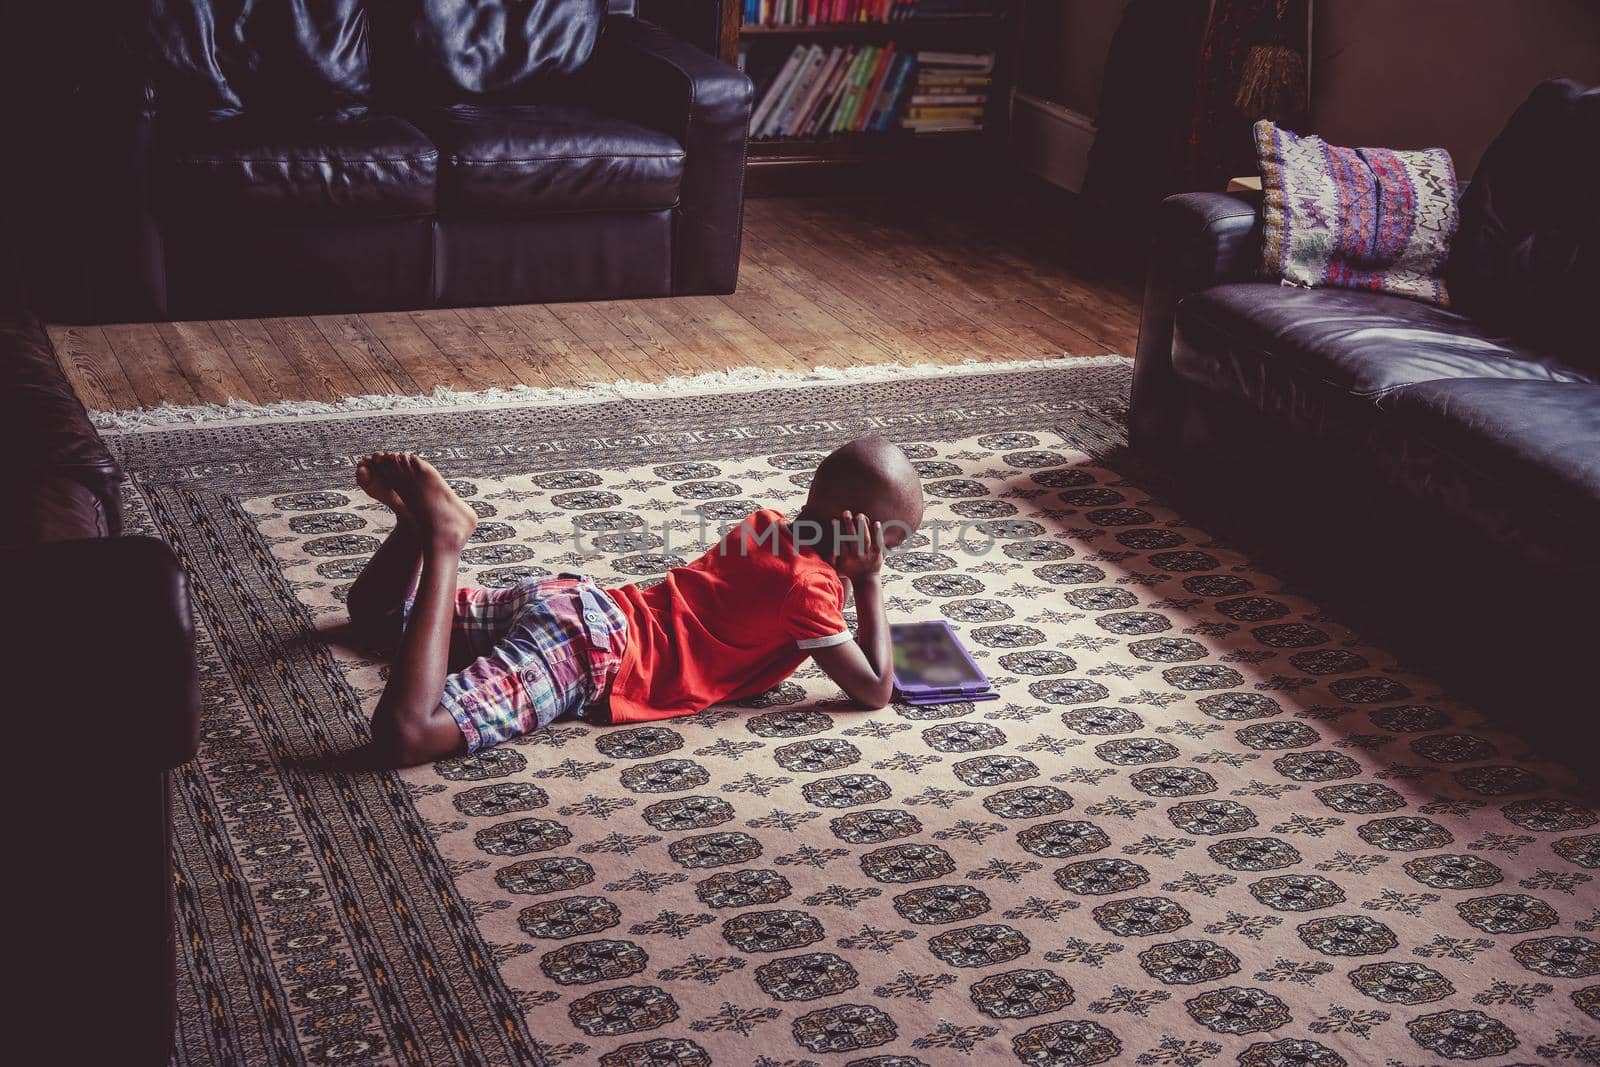 Young boy using a tablet in a relaxed home setting by magicbones